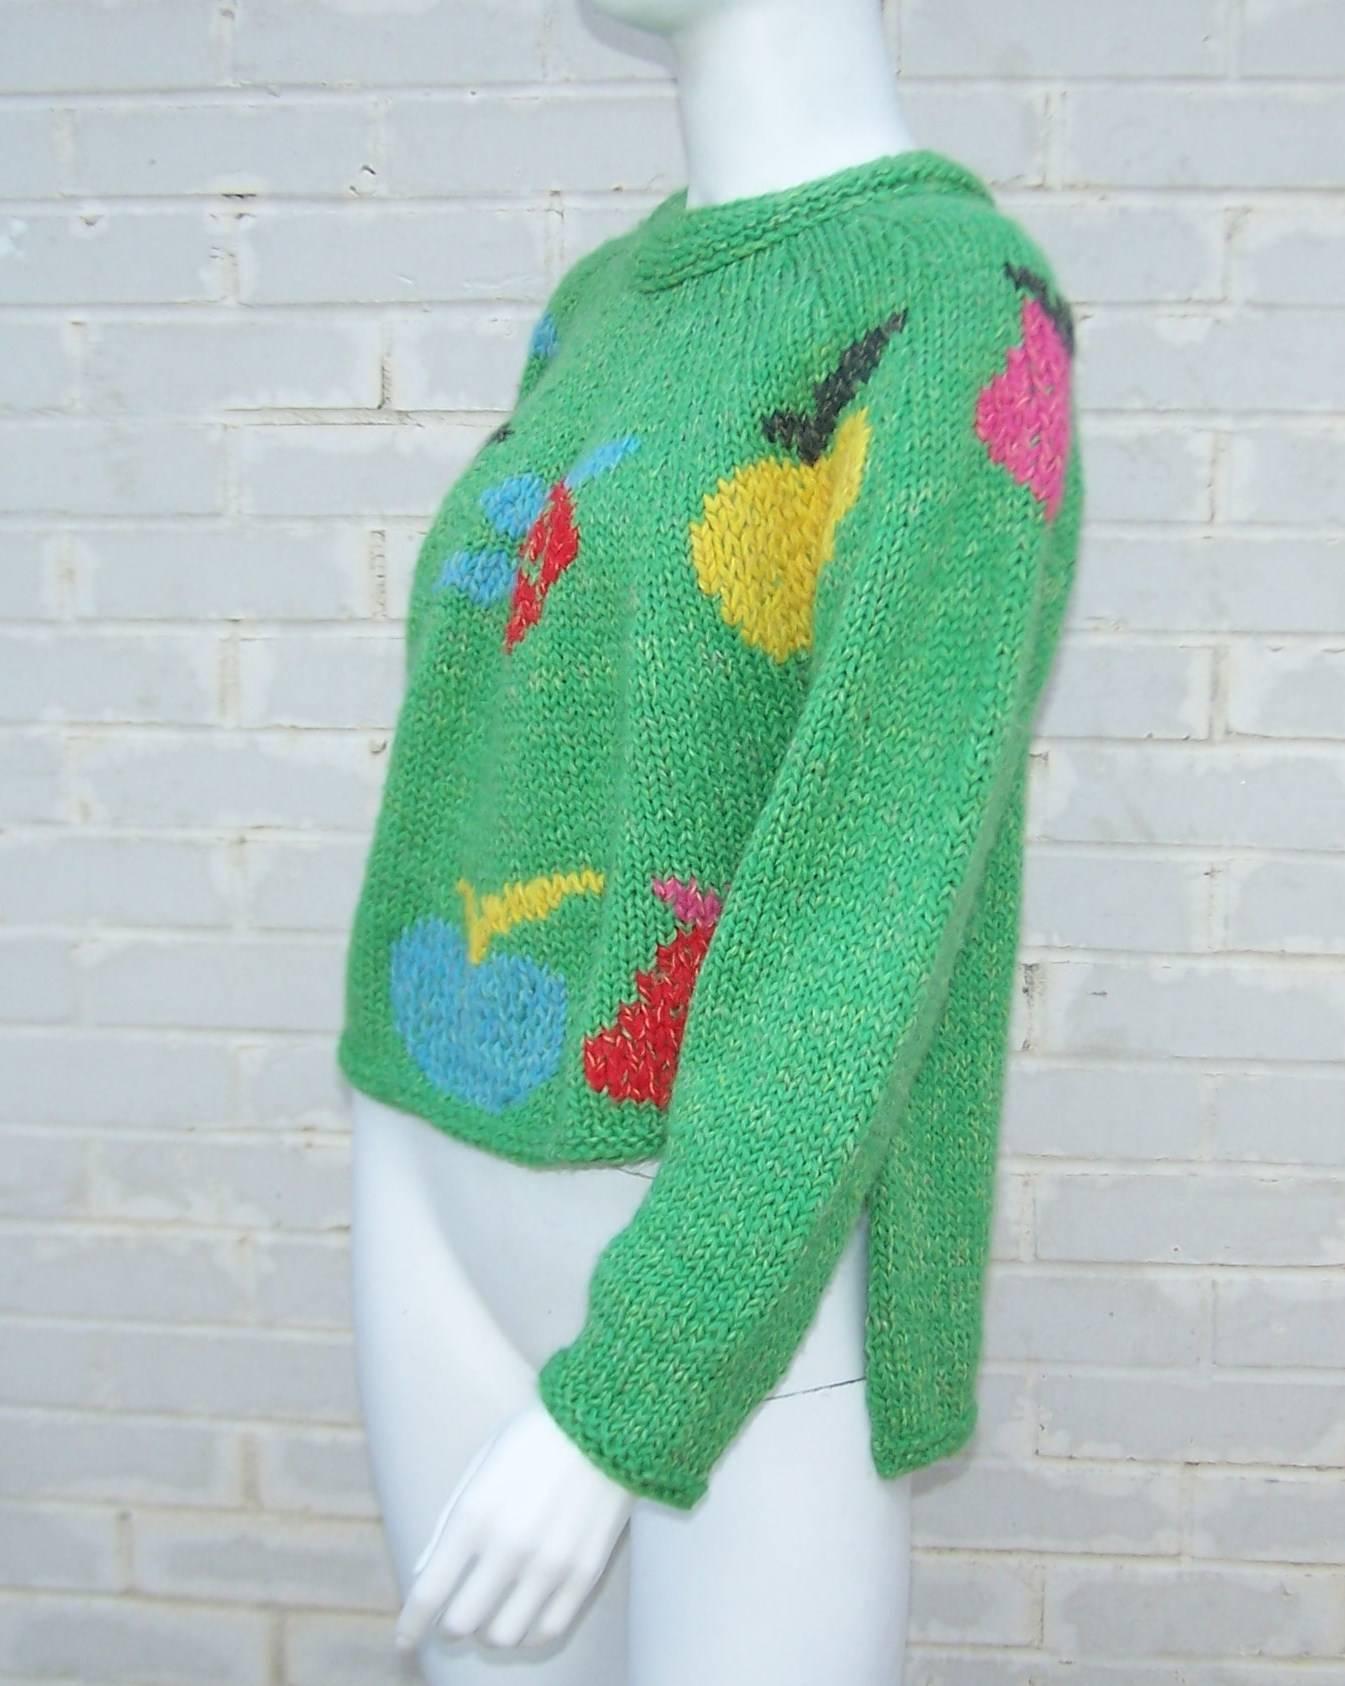 What a cutie!  Italian designer, Enrico Coveri, paired bright green wool with colorful fruit images to make a cozy bear hug of a sweater.  Even better, he created an playful silhouette by cropping the front and providing a long tail in the back. 